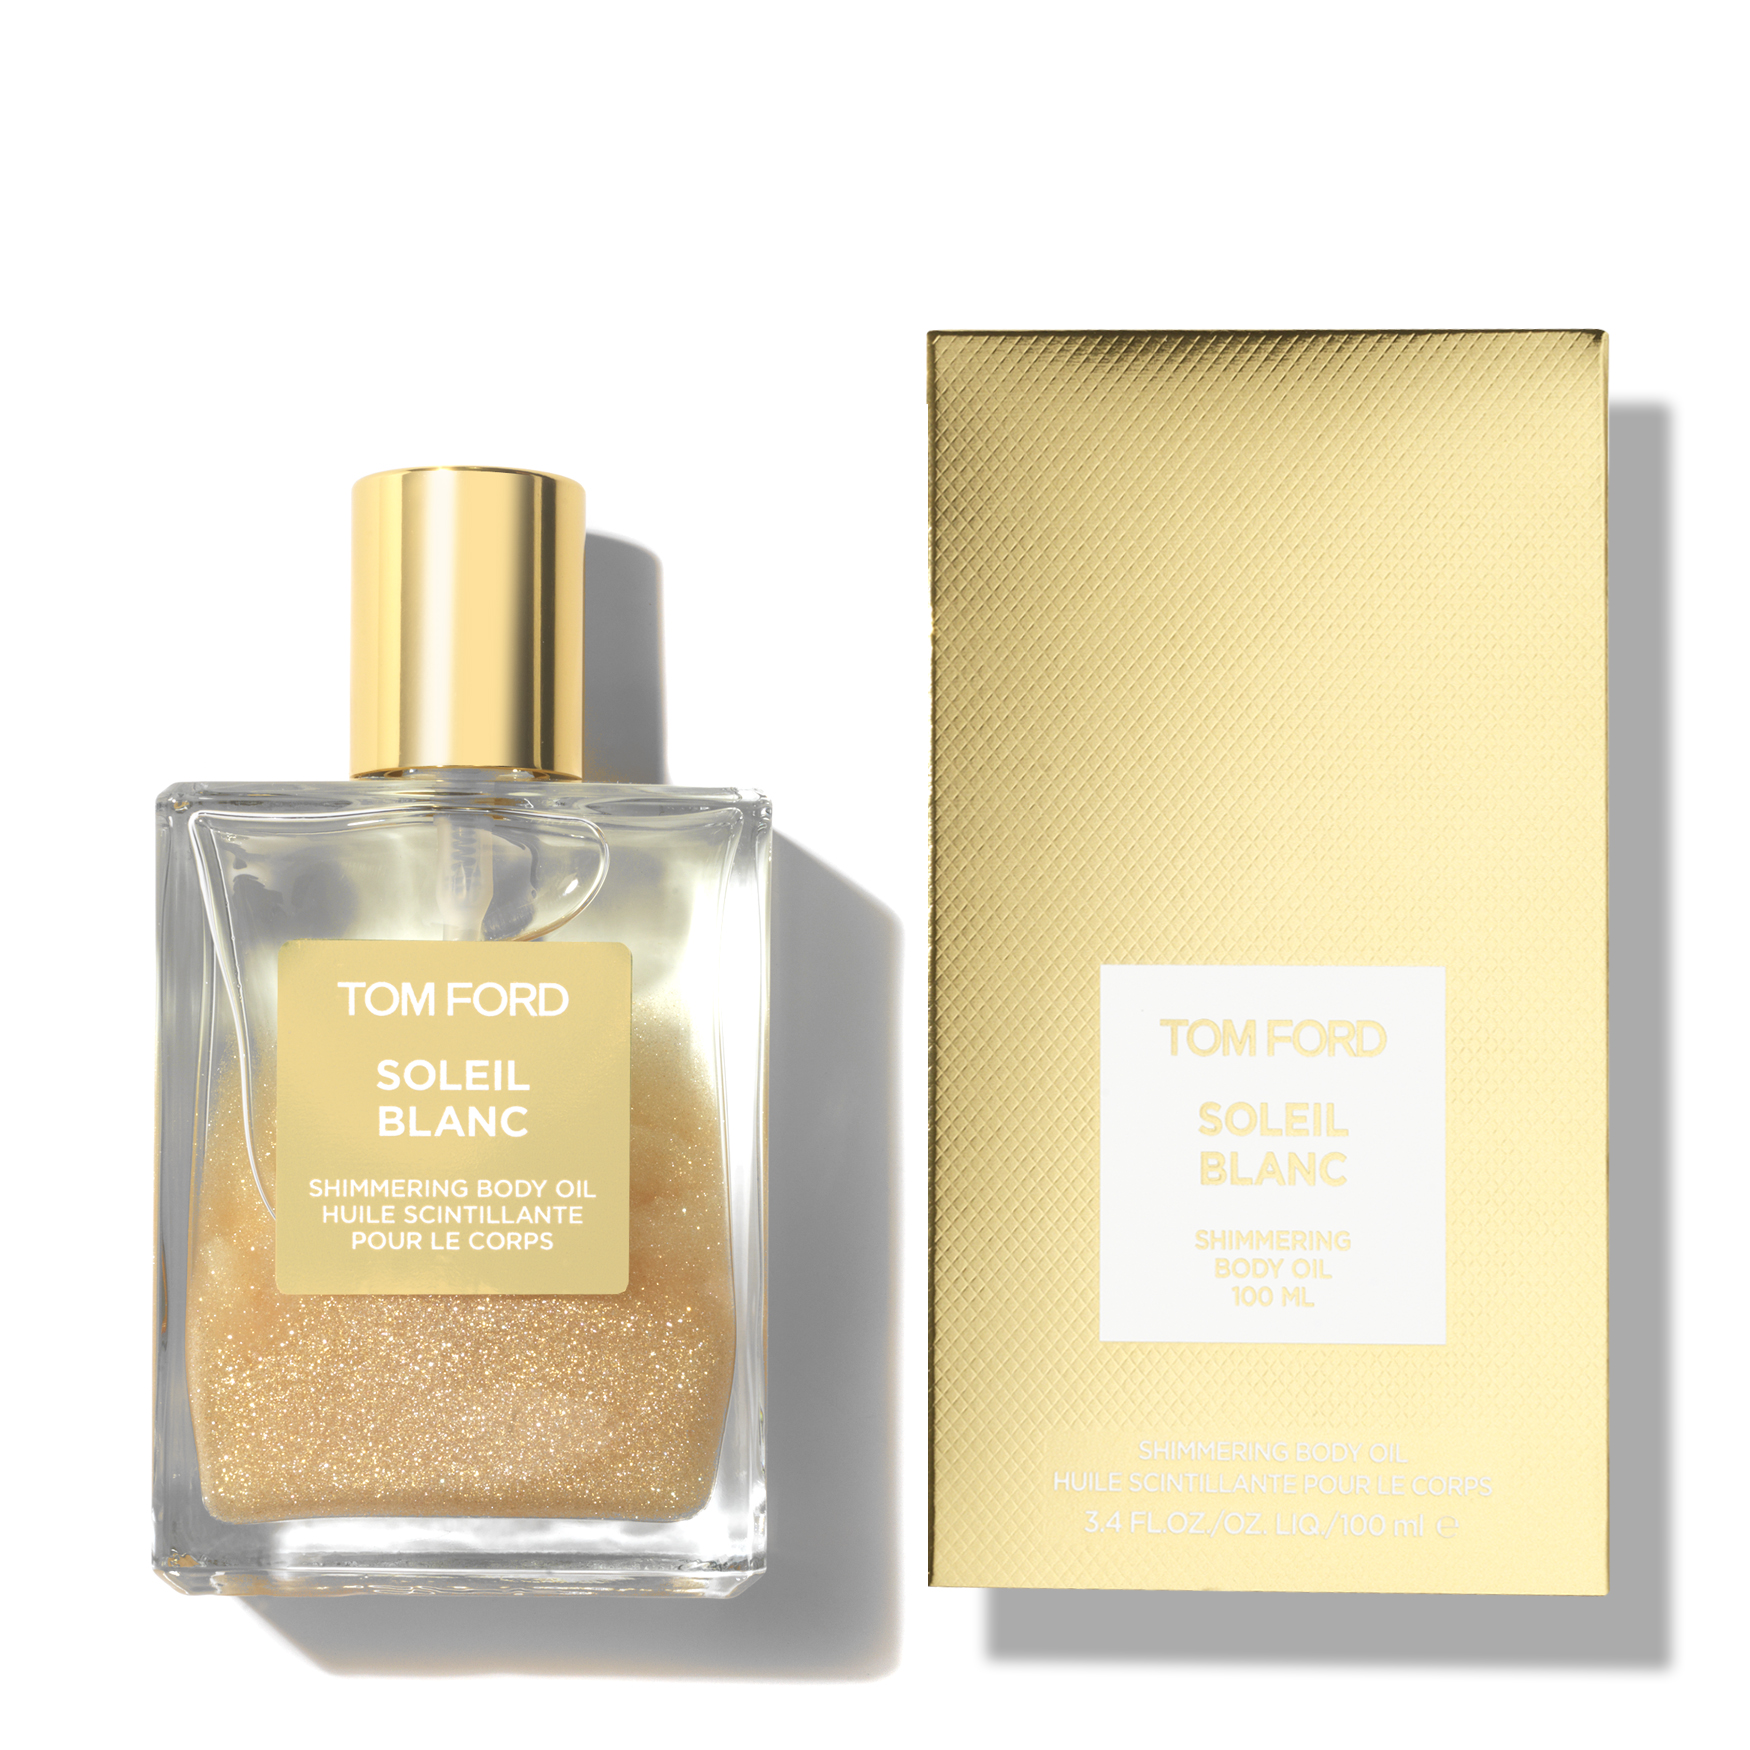 Tom Ford Soleil Blanc Shimmering Body Oil | Space NK